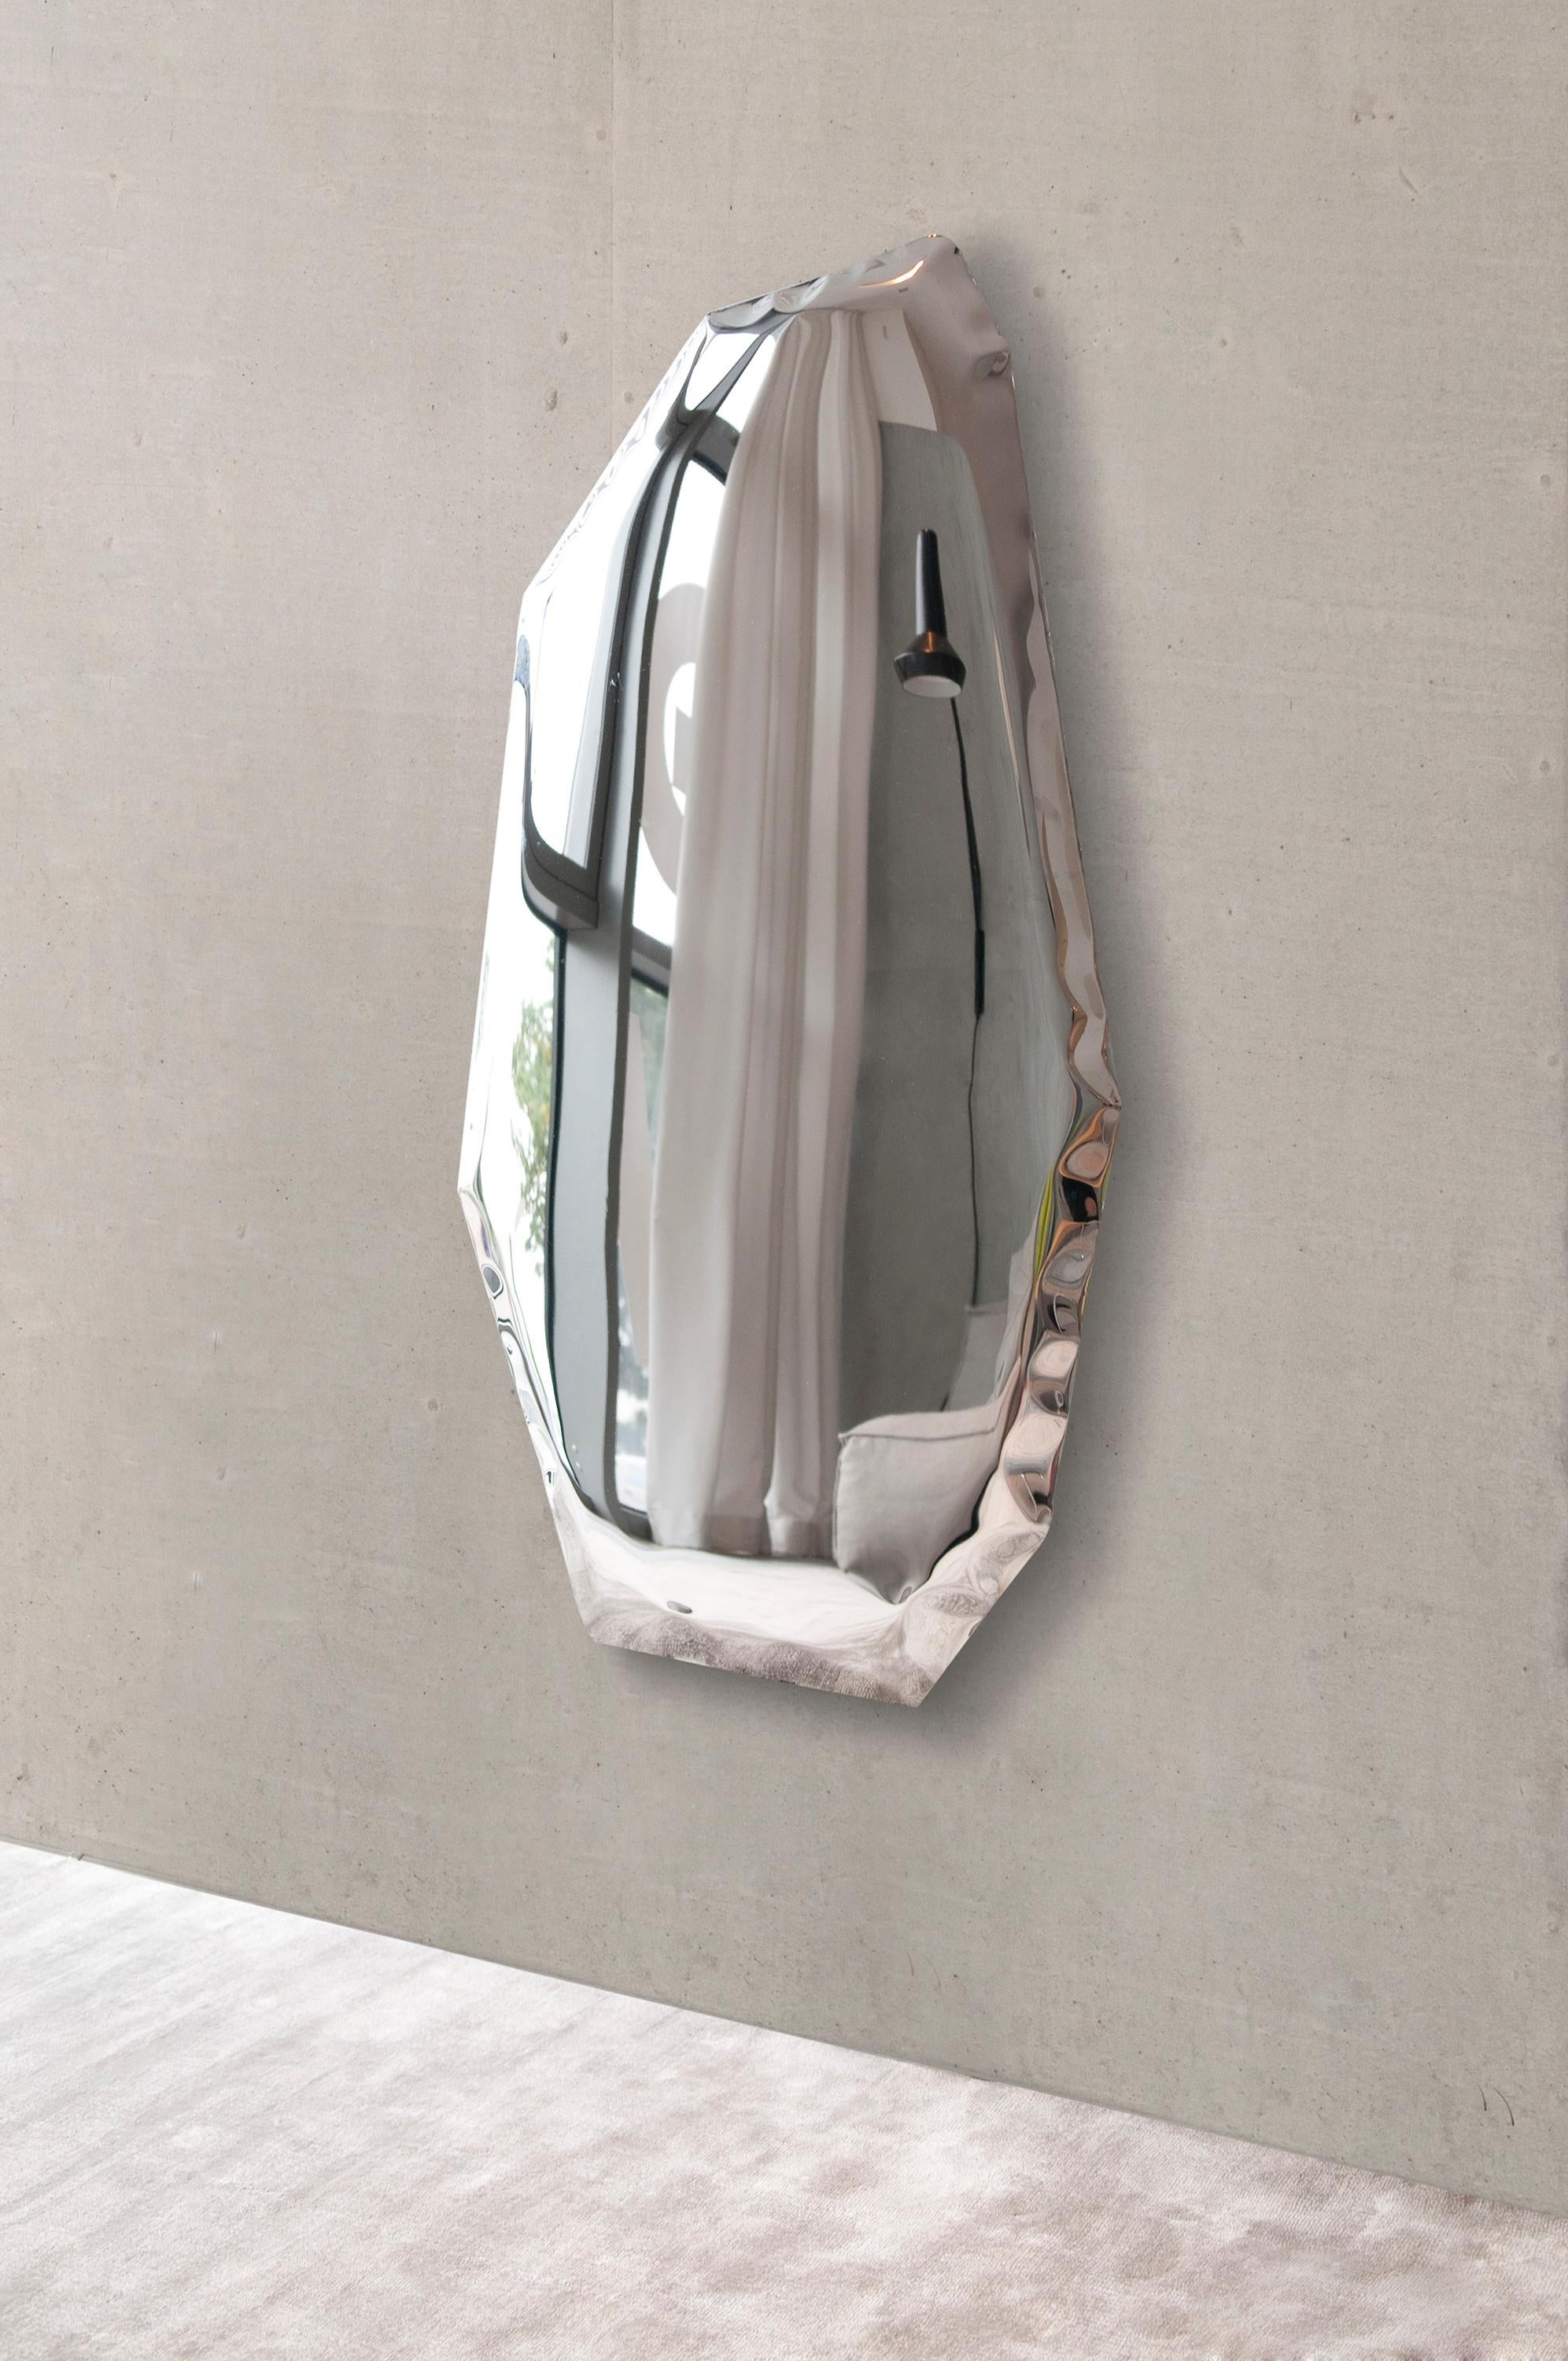 Stainless Steel Tafla C4 Sculptural Wall Mirror by Zieta For Sale 1